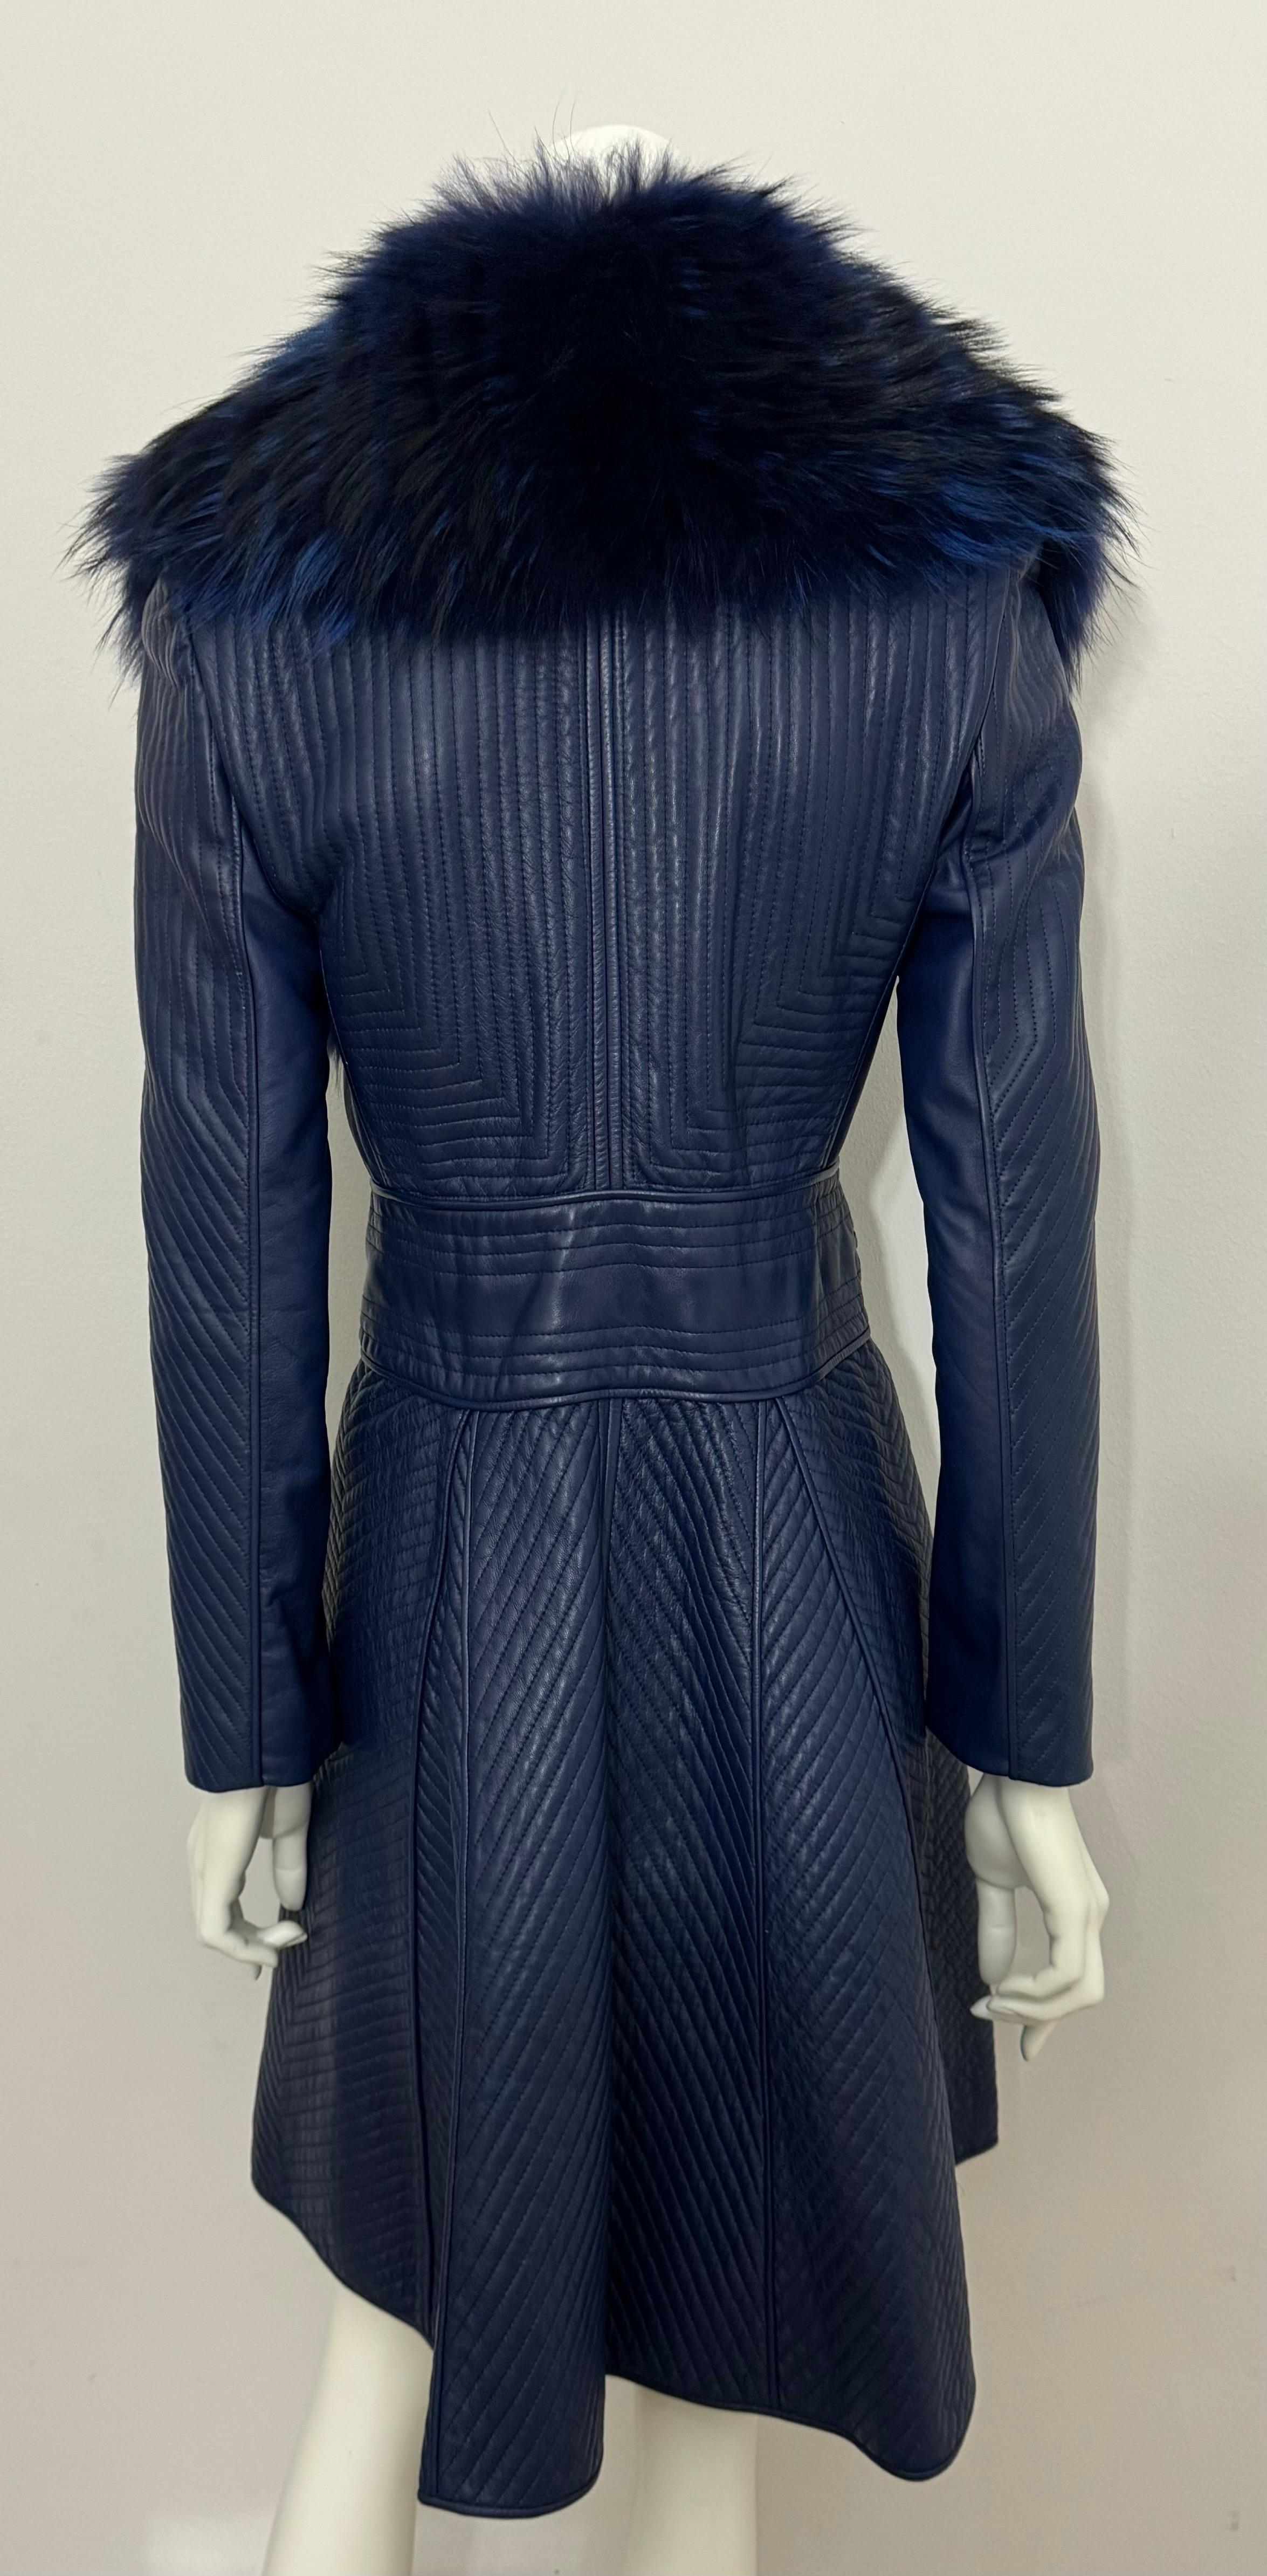 J Mendel Runway Pre Fall 2014 Fur Collar Blue Quilted Leather Coat Dress-Size 4 For Sale 3